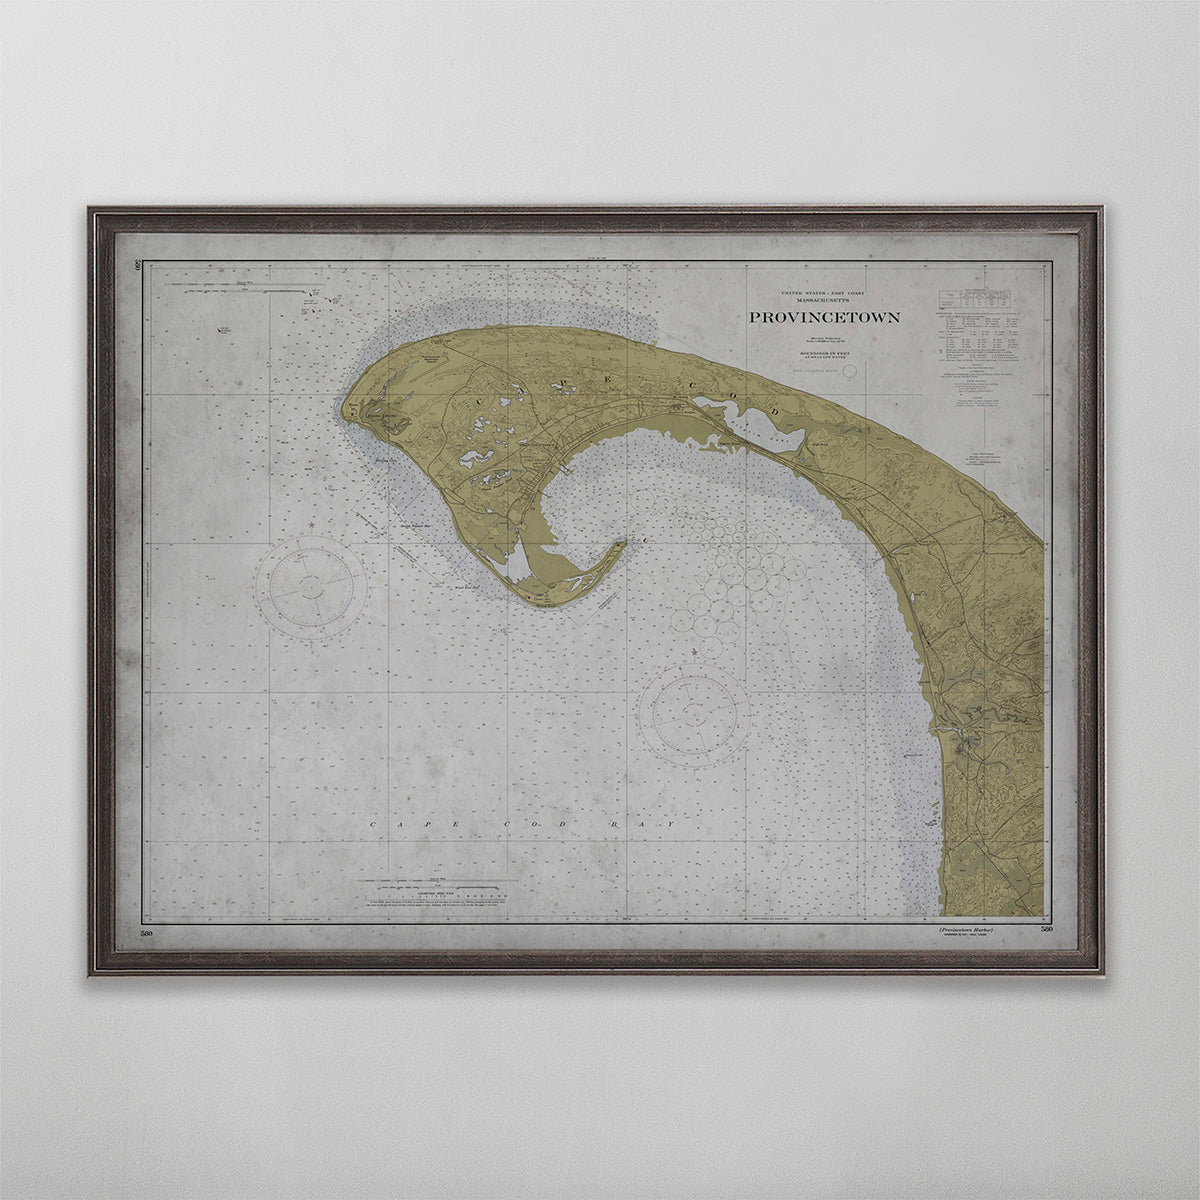 Old vintage historic nautical chart of Provincetown, Massachusetts wall art home decor. 